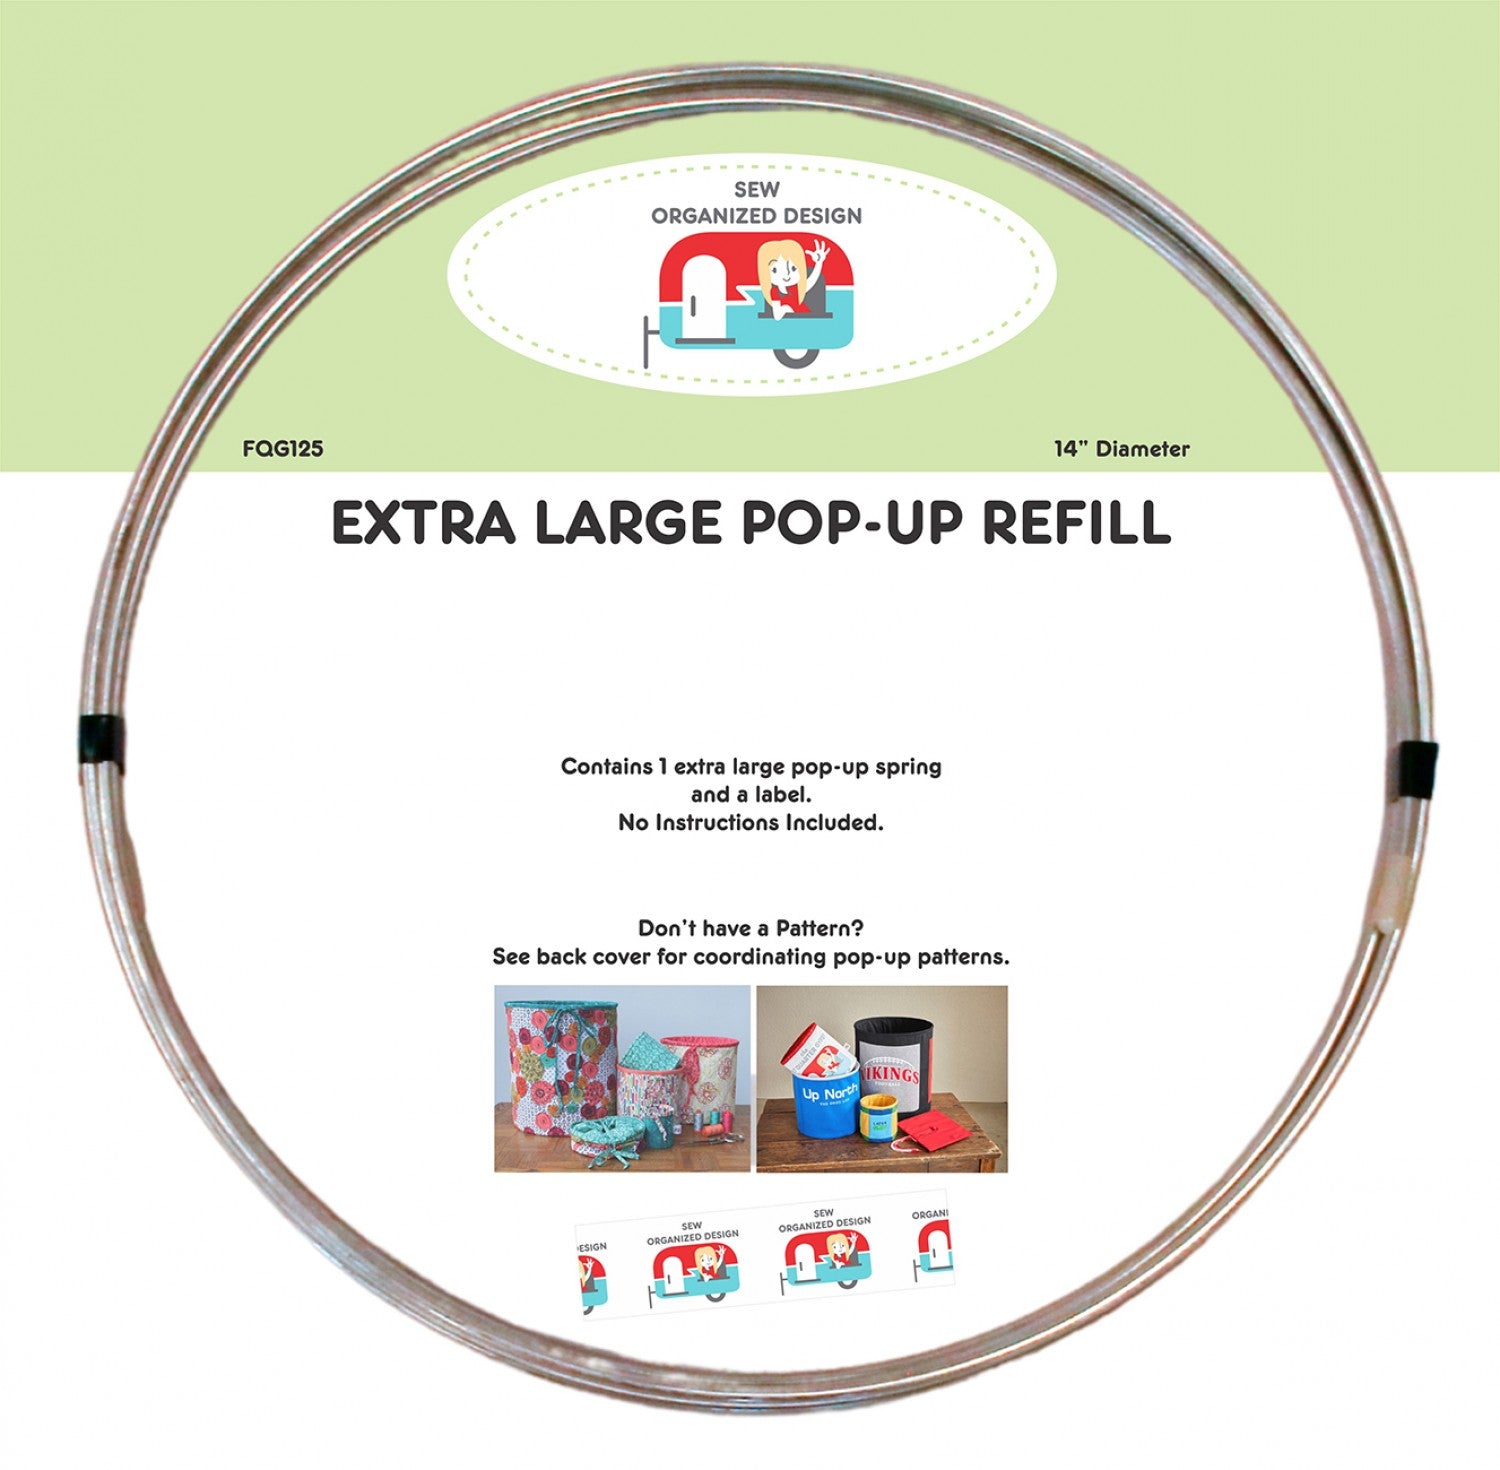 Extra Large 14-Inch Pop Up Refill by Joanne Hillestad for Sew Organized Design